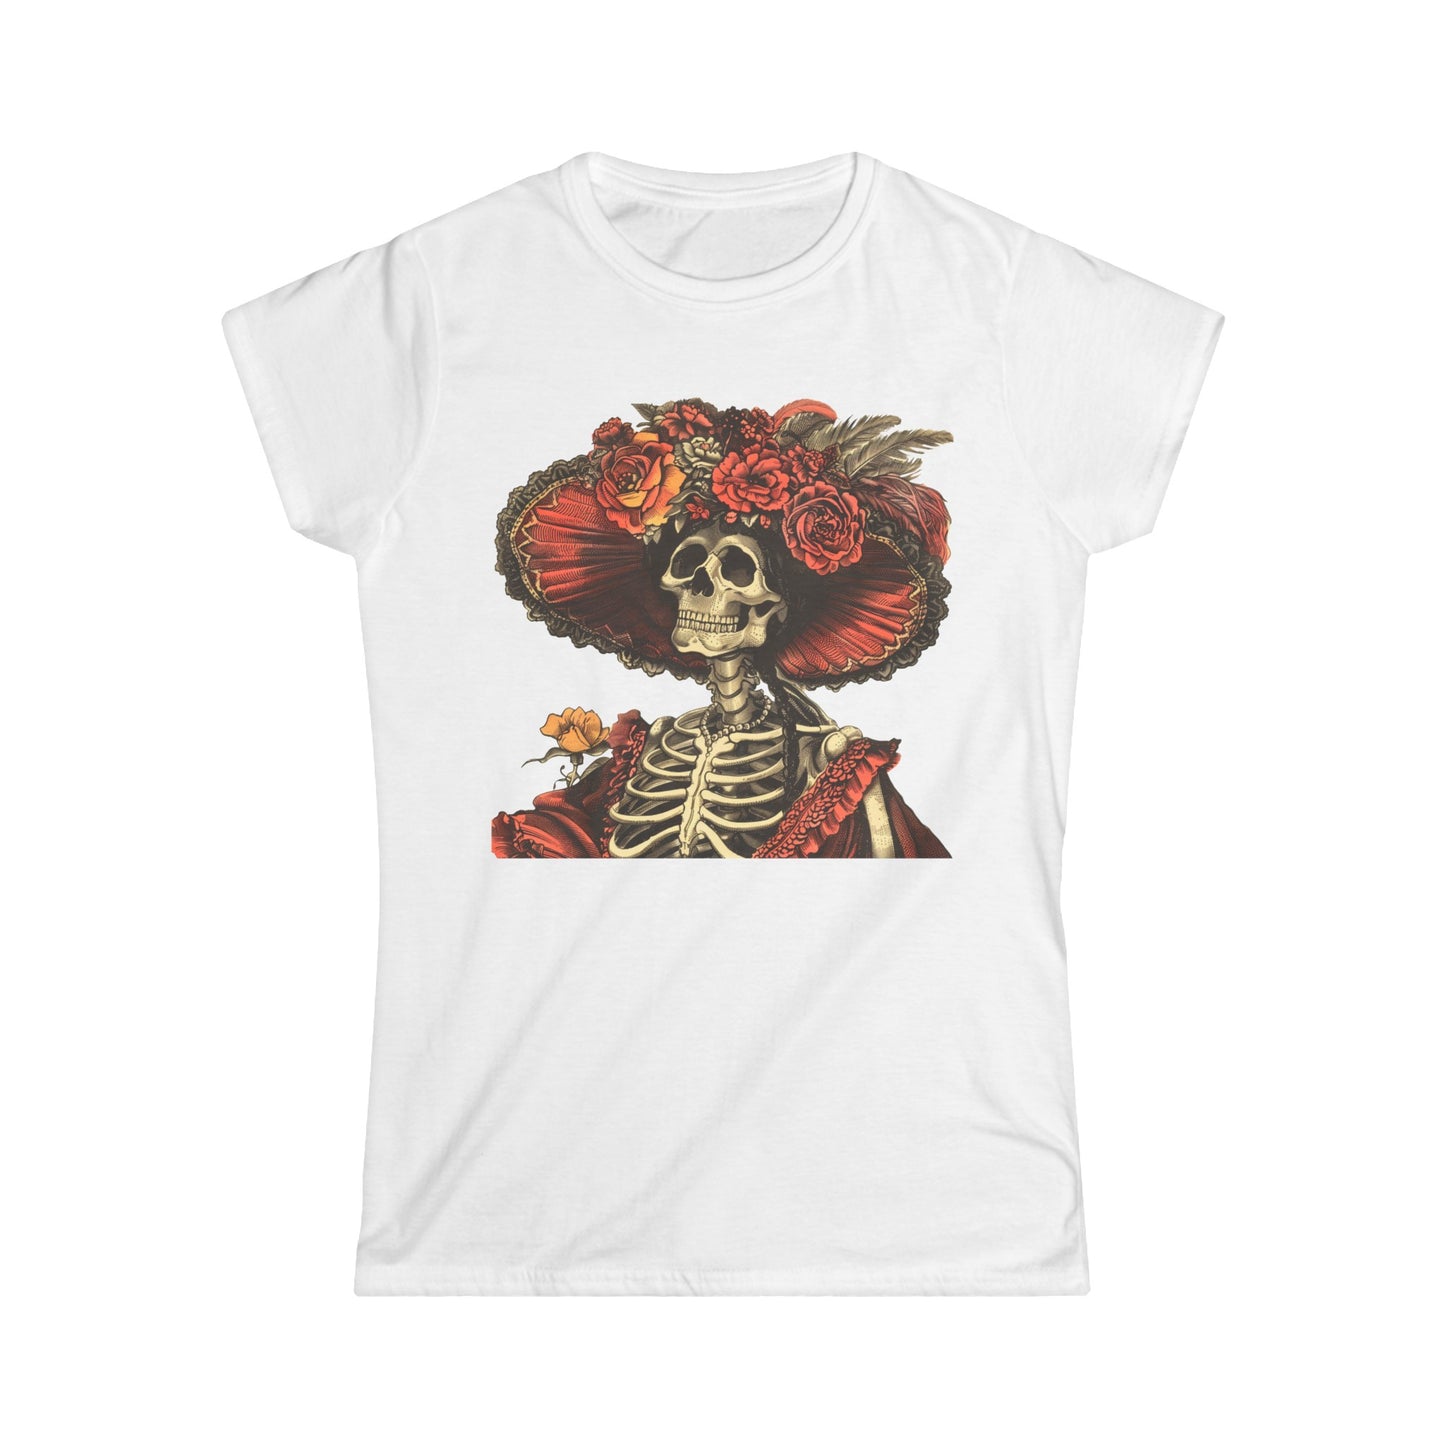 Women's Skeleton Lady Catrina Inspired Day of the Dead Softstyle Tee by Casita De Los Muertos